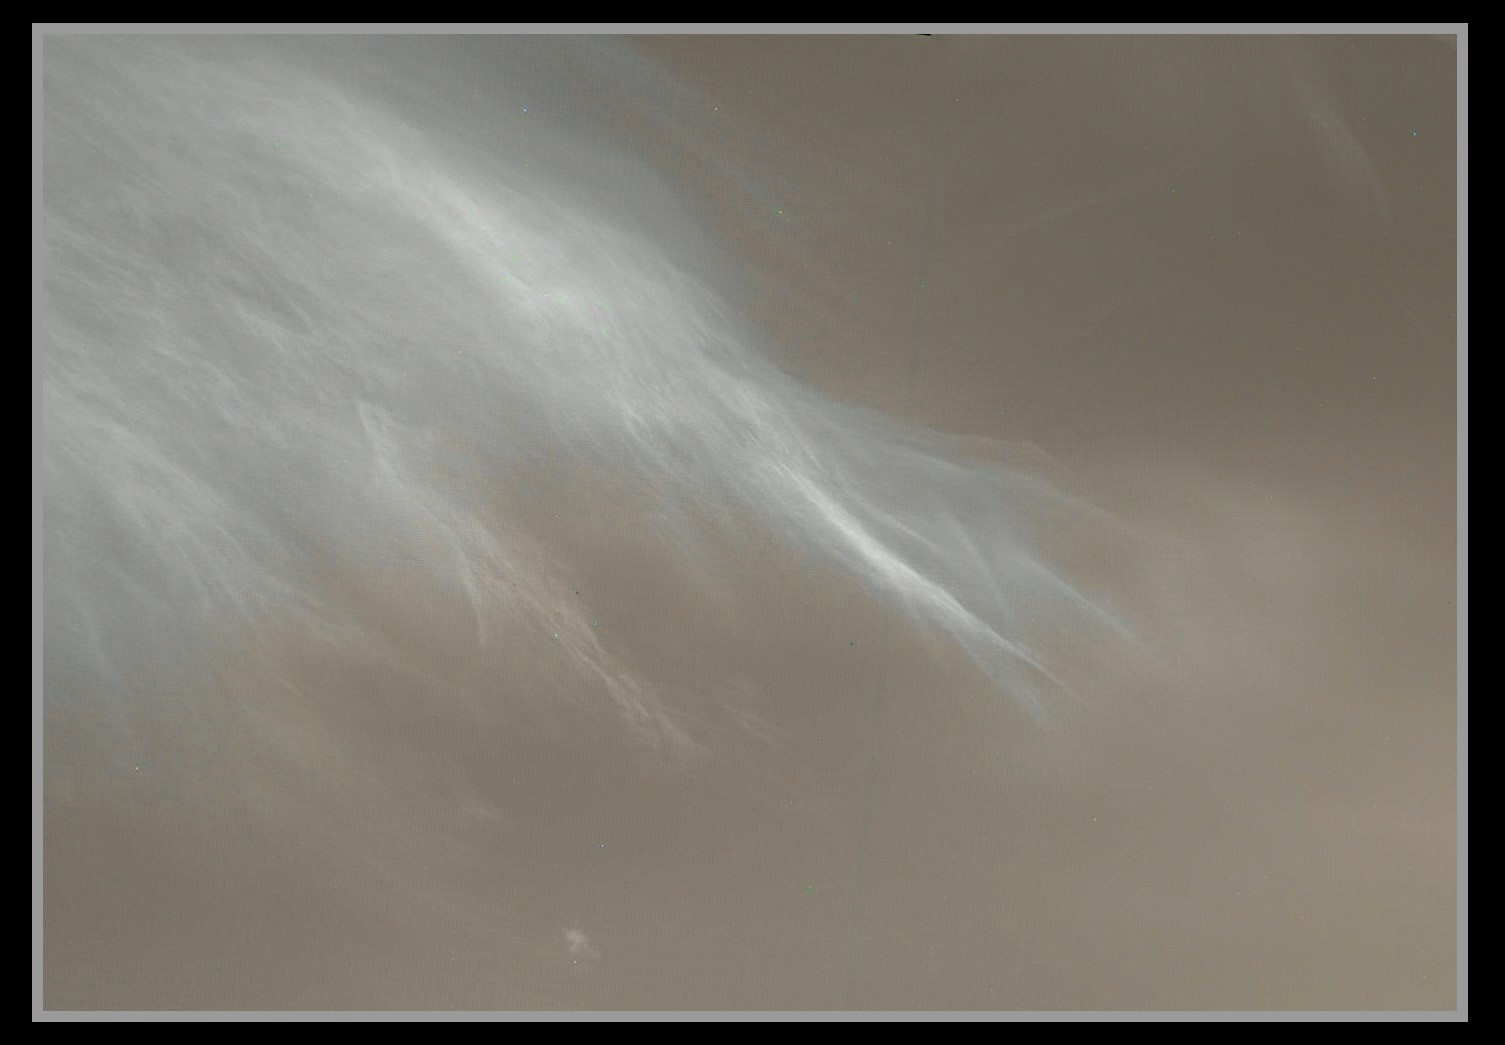 Thin wispy white clouds agains a dusty Martian sky.